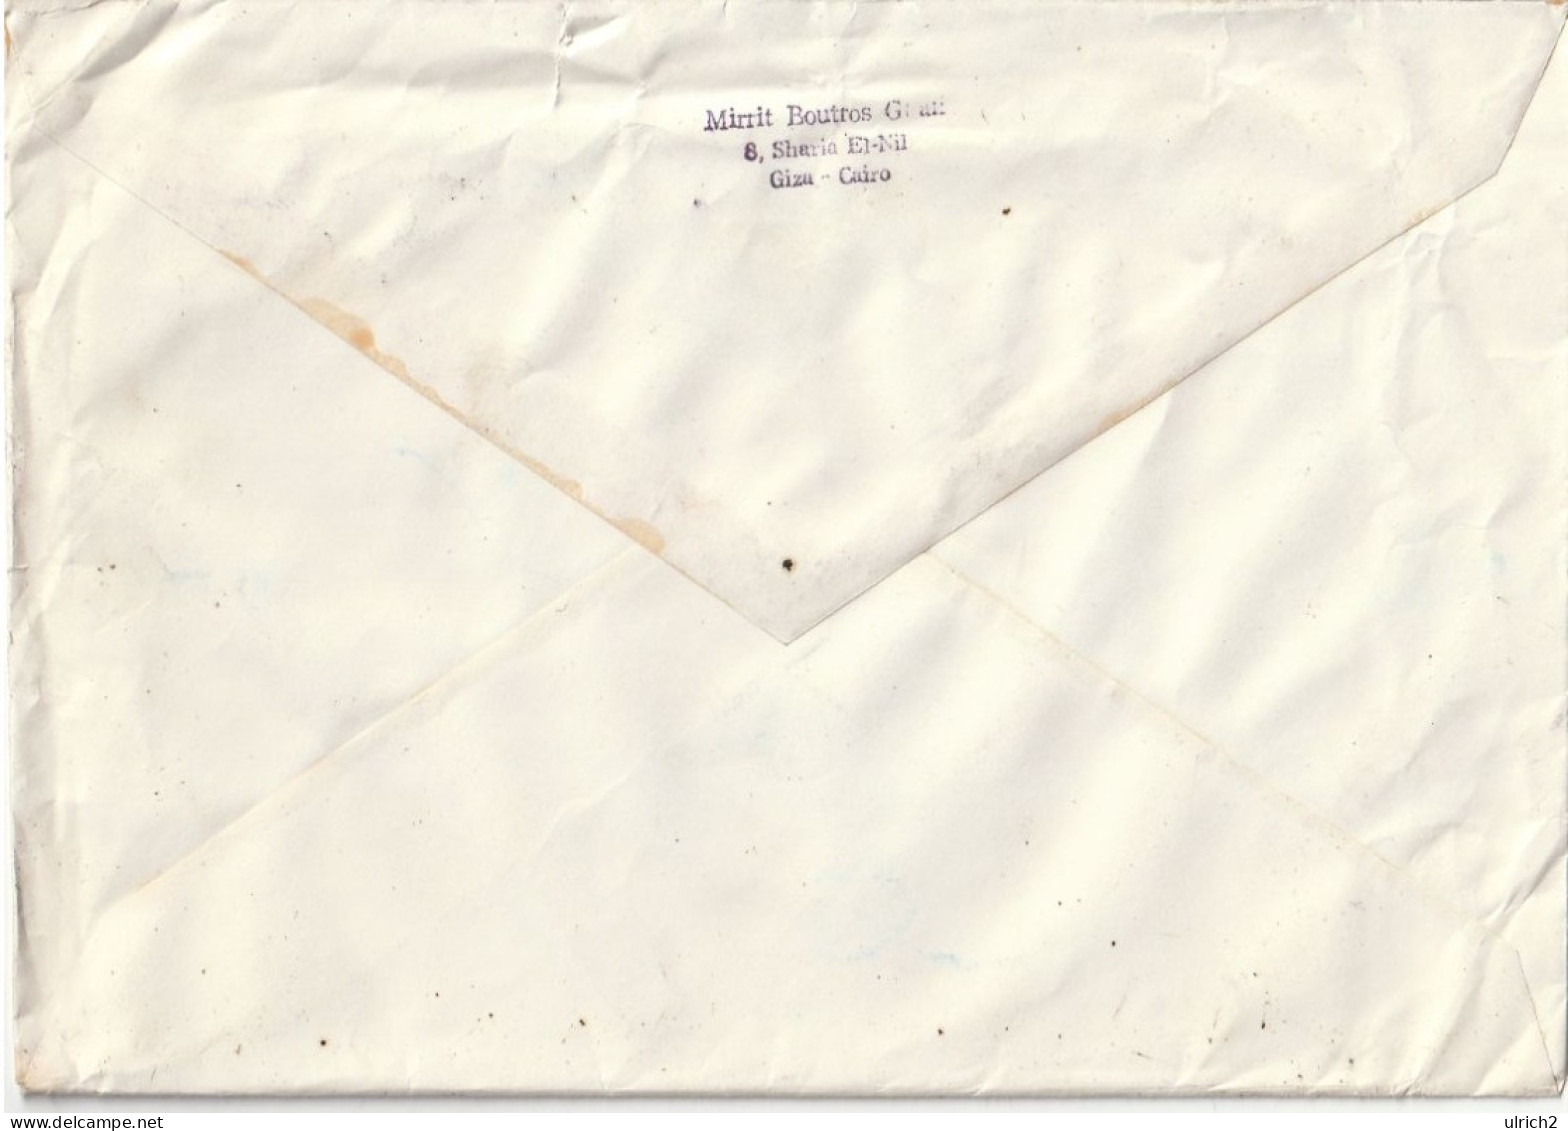 Airmail Letter - Ägypten - To Germany - Mirrit Boutros Ghali - 1978 (66977) - Lettres & Documents